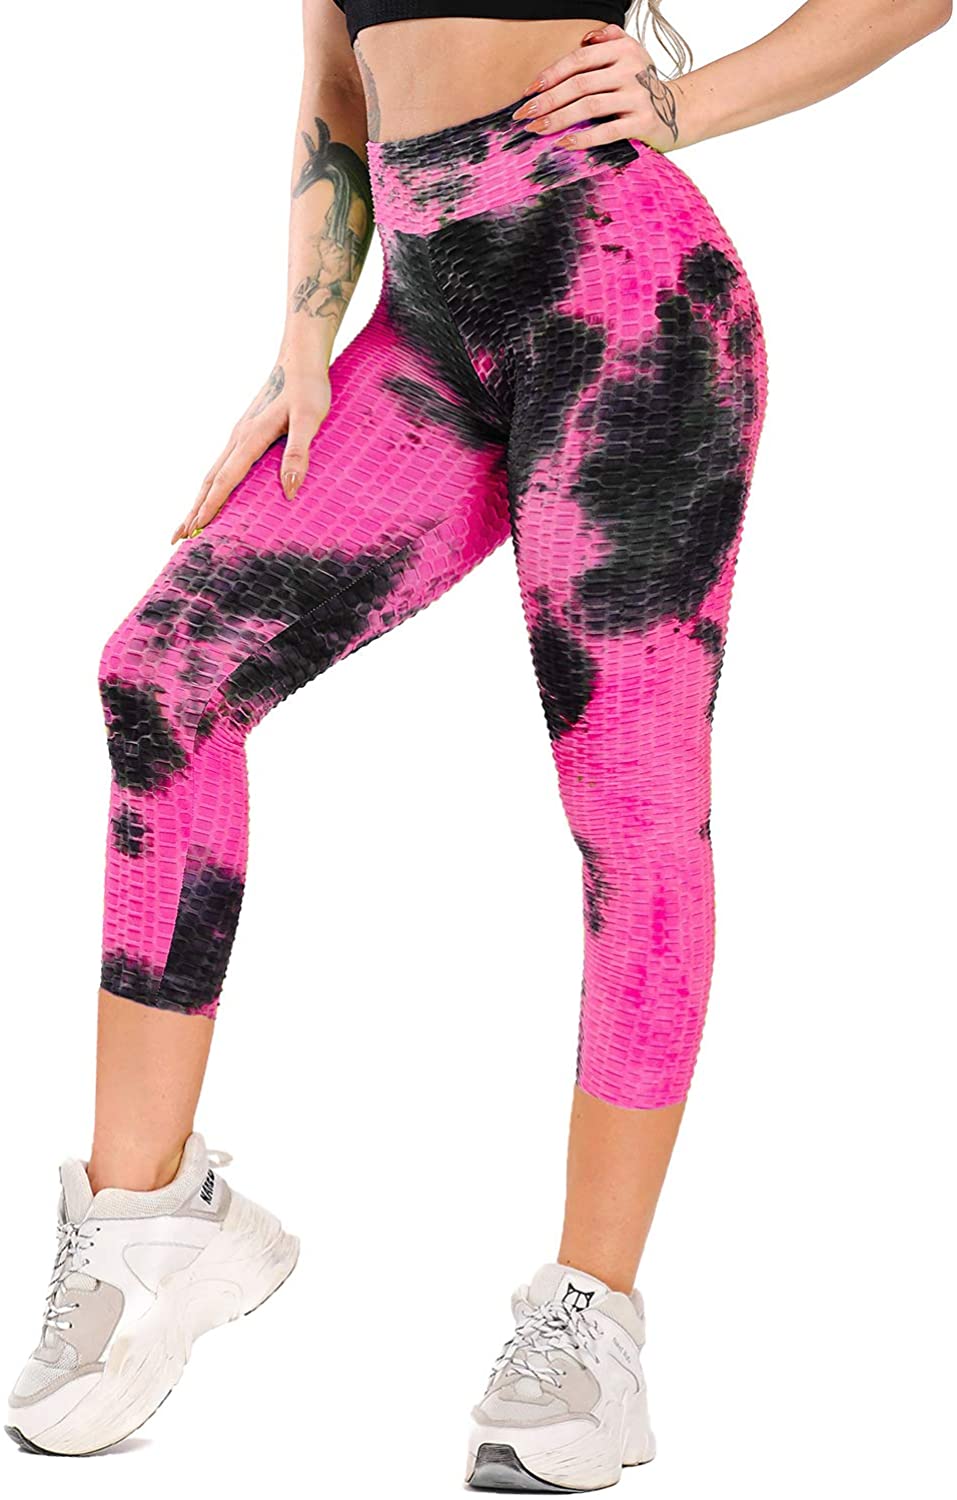 YUHAOTIN Yoga Pants for Women with Pockets High Waisted Women'S Tie Dyed  High Waist Fitness Pants Peach Lifting Yoga Pants Exercise Tights Cropped  Pants Pink Yoga Pants Black Leggings Tummy Control 